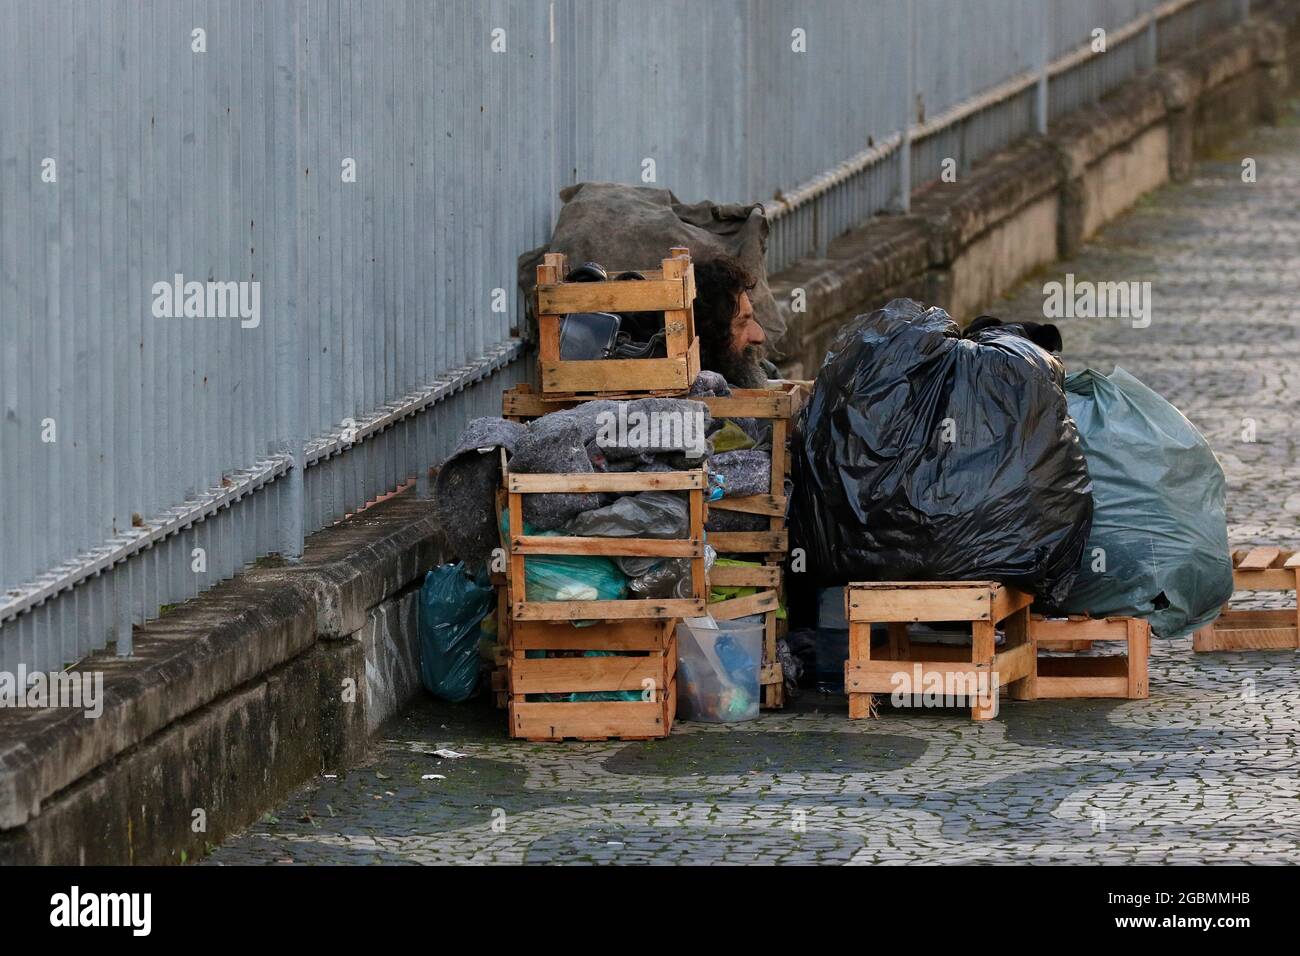 Homeless man, beggar living on a sidewalk during economic crisis at downtown, seeking help, hungry. Poverty vulnerable situation, social issues in lat Stock Photo